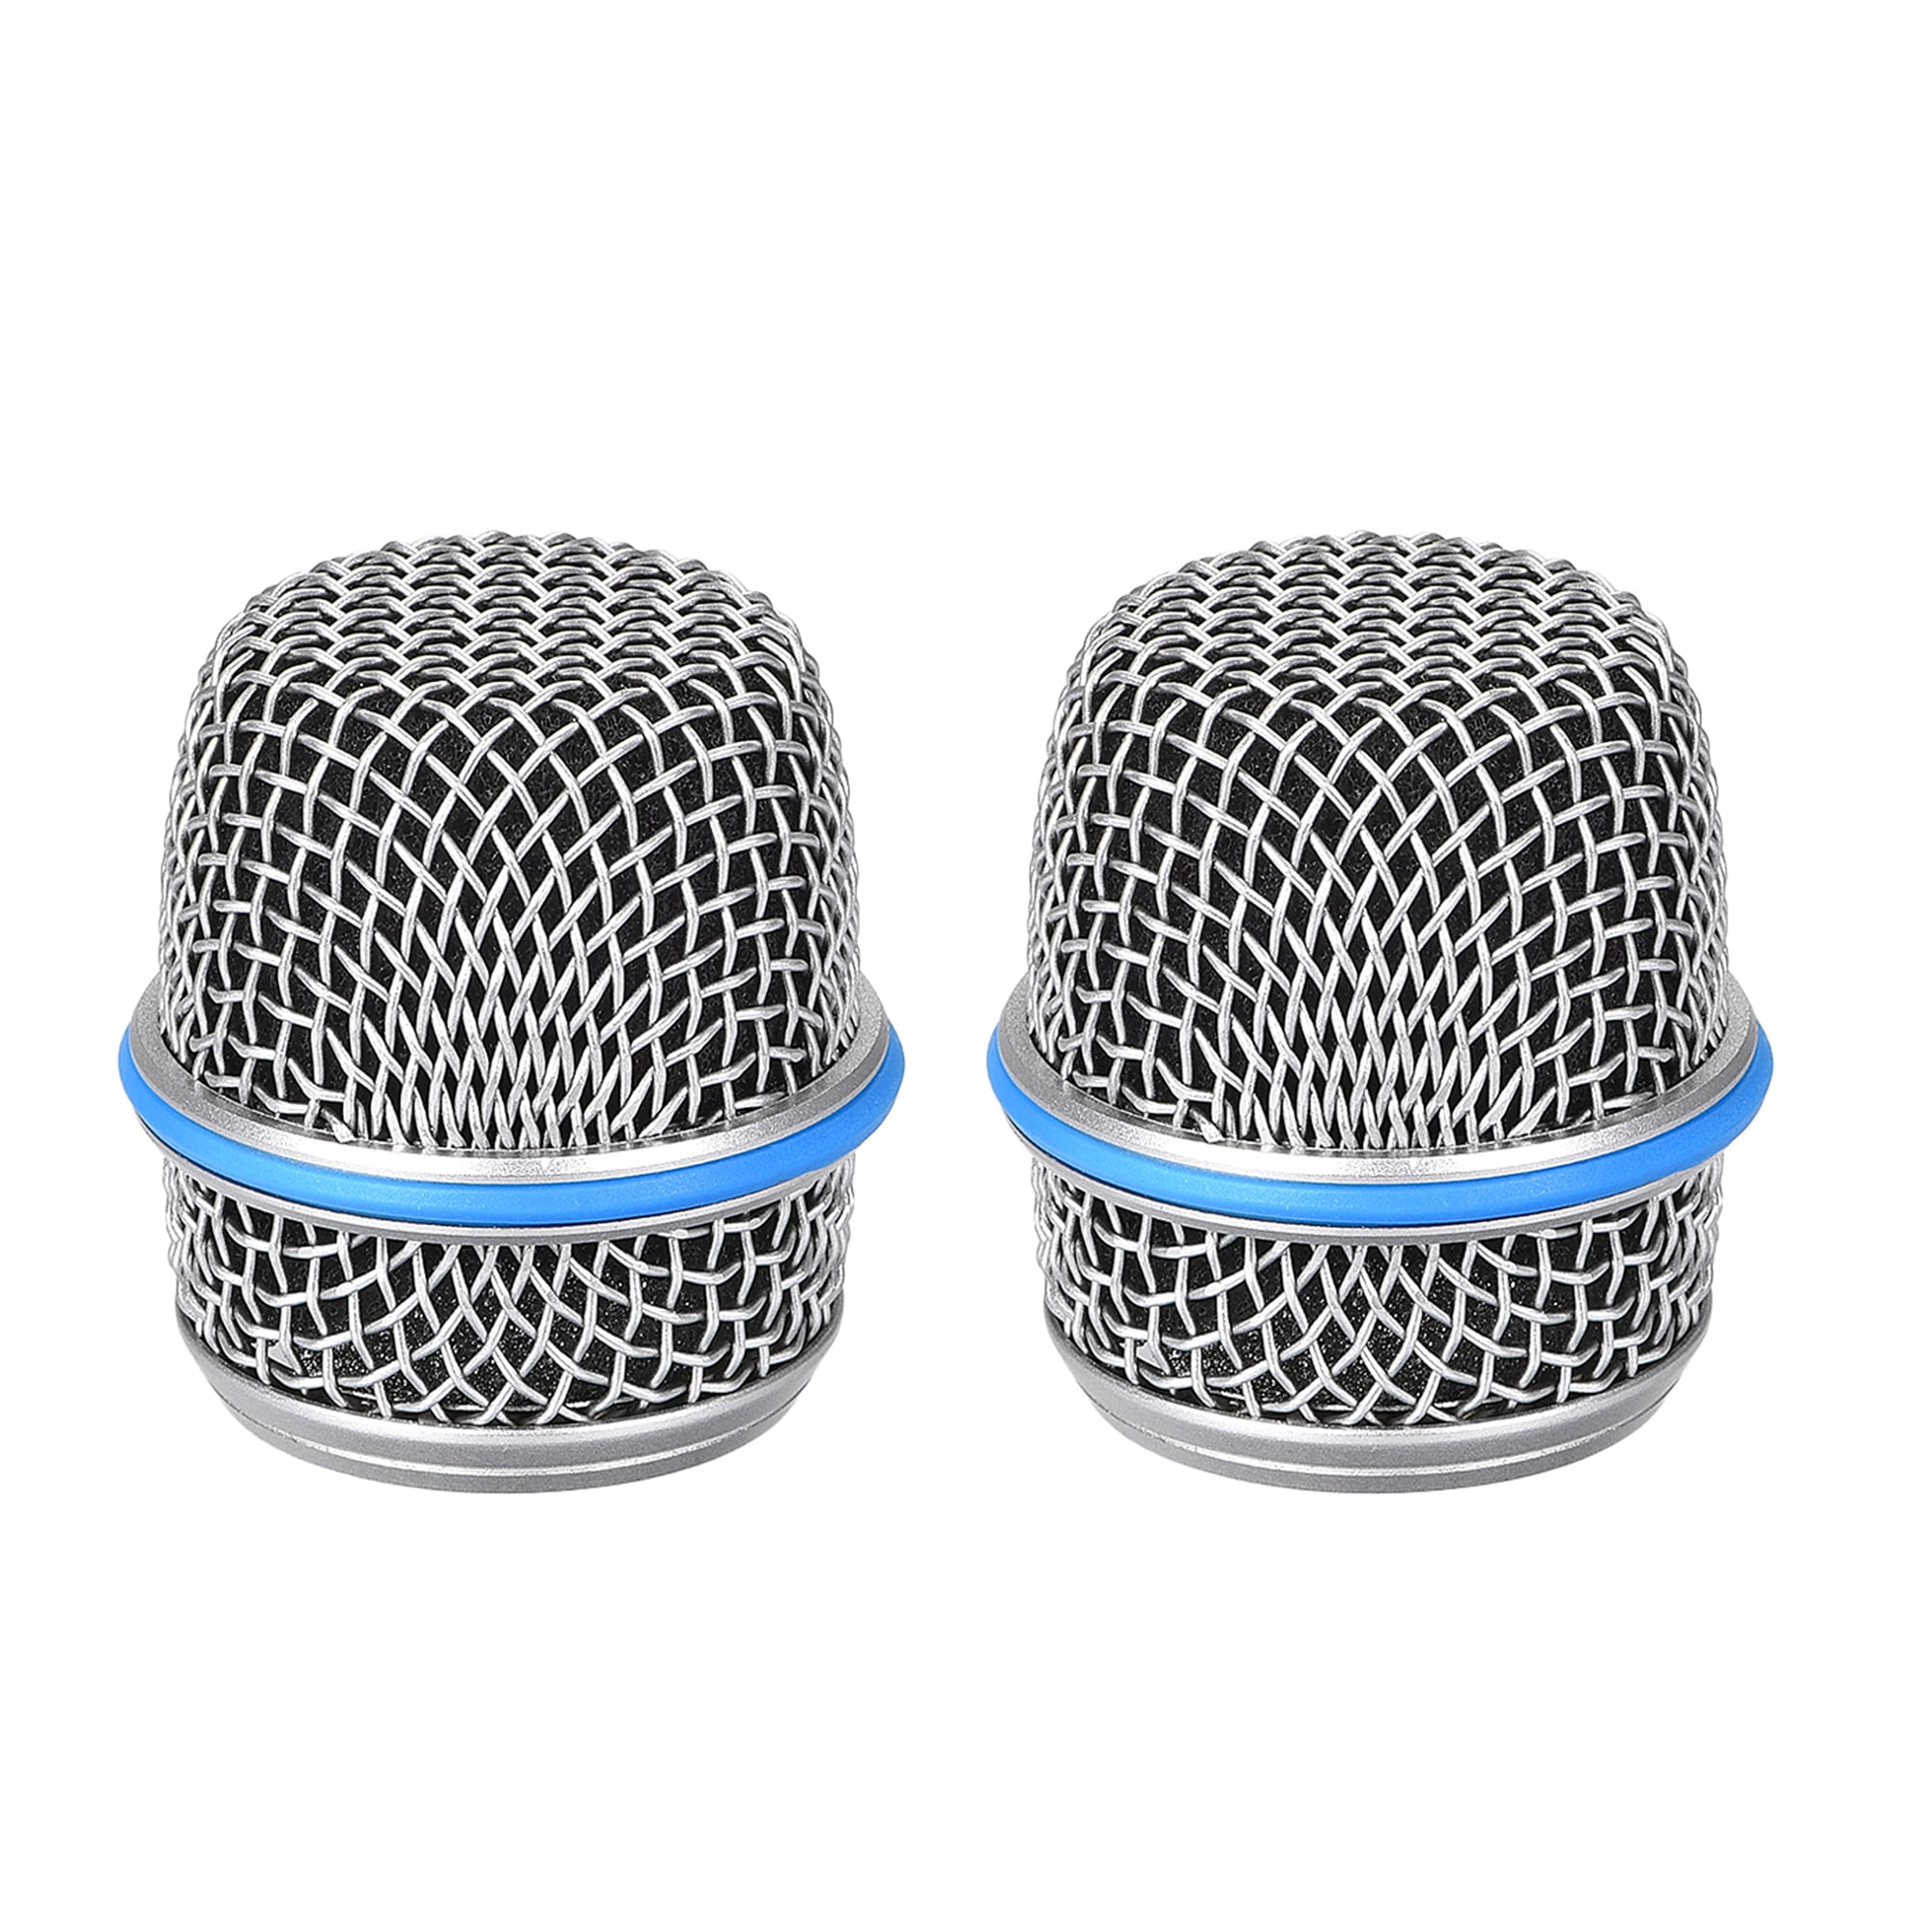 WALLER PAA 10pcs New Replacement Ball Head Mesh Microphone Grille for Shure BETA58 SM58